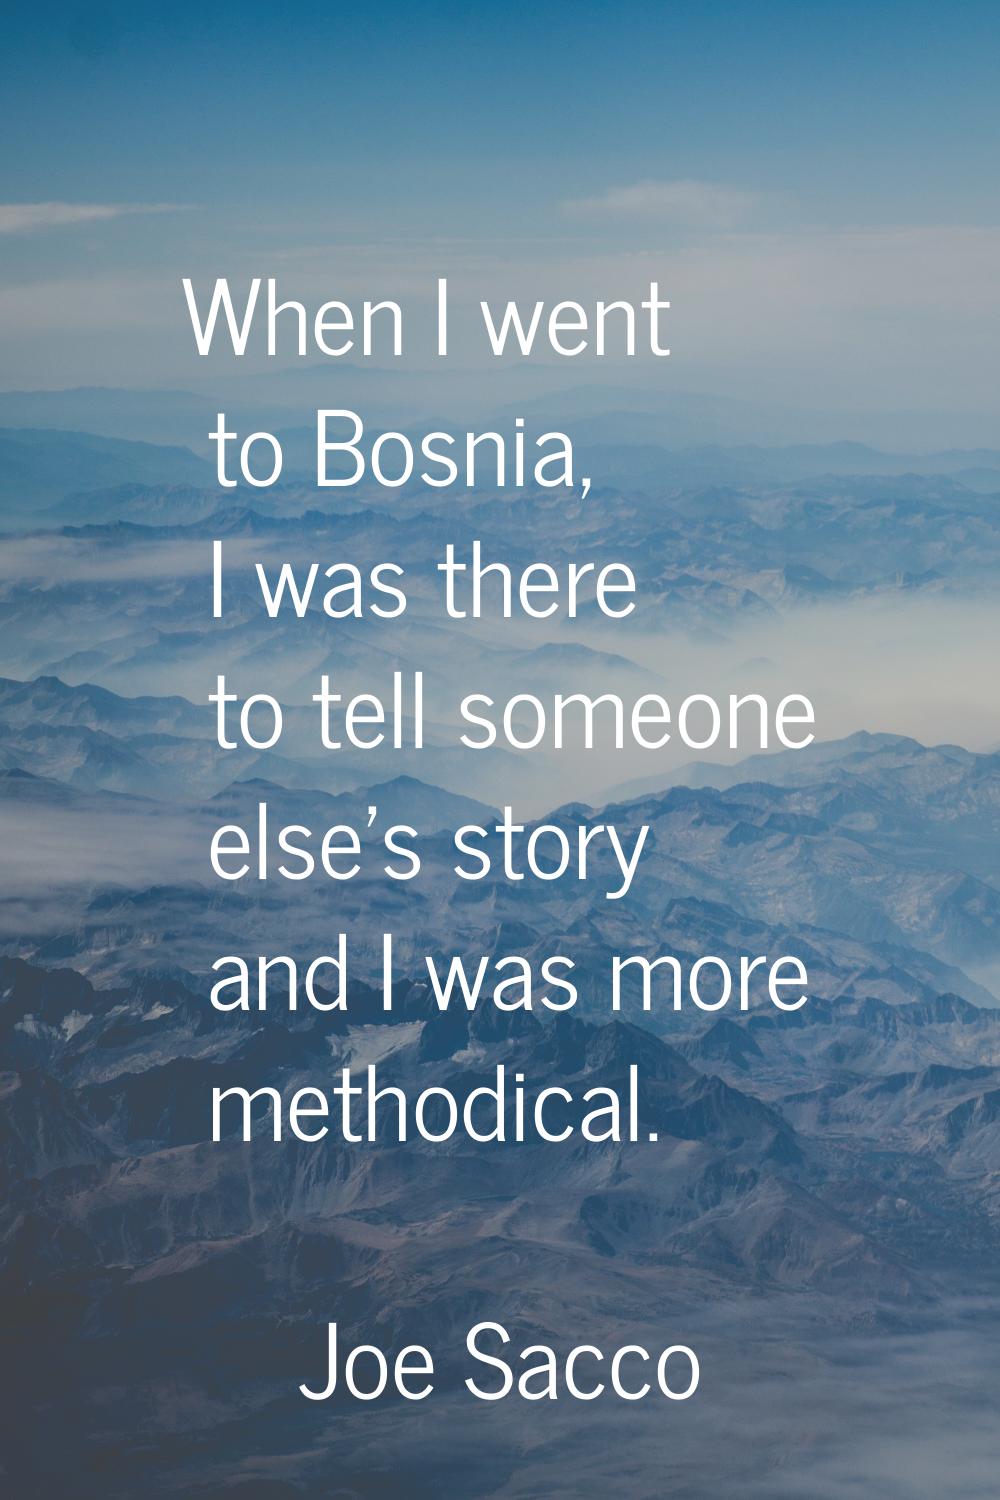 When I went to Bosnia, I was there to tell someone else's story and I was more methodical.